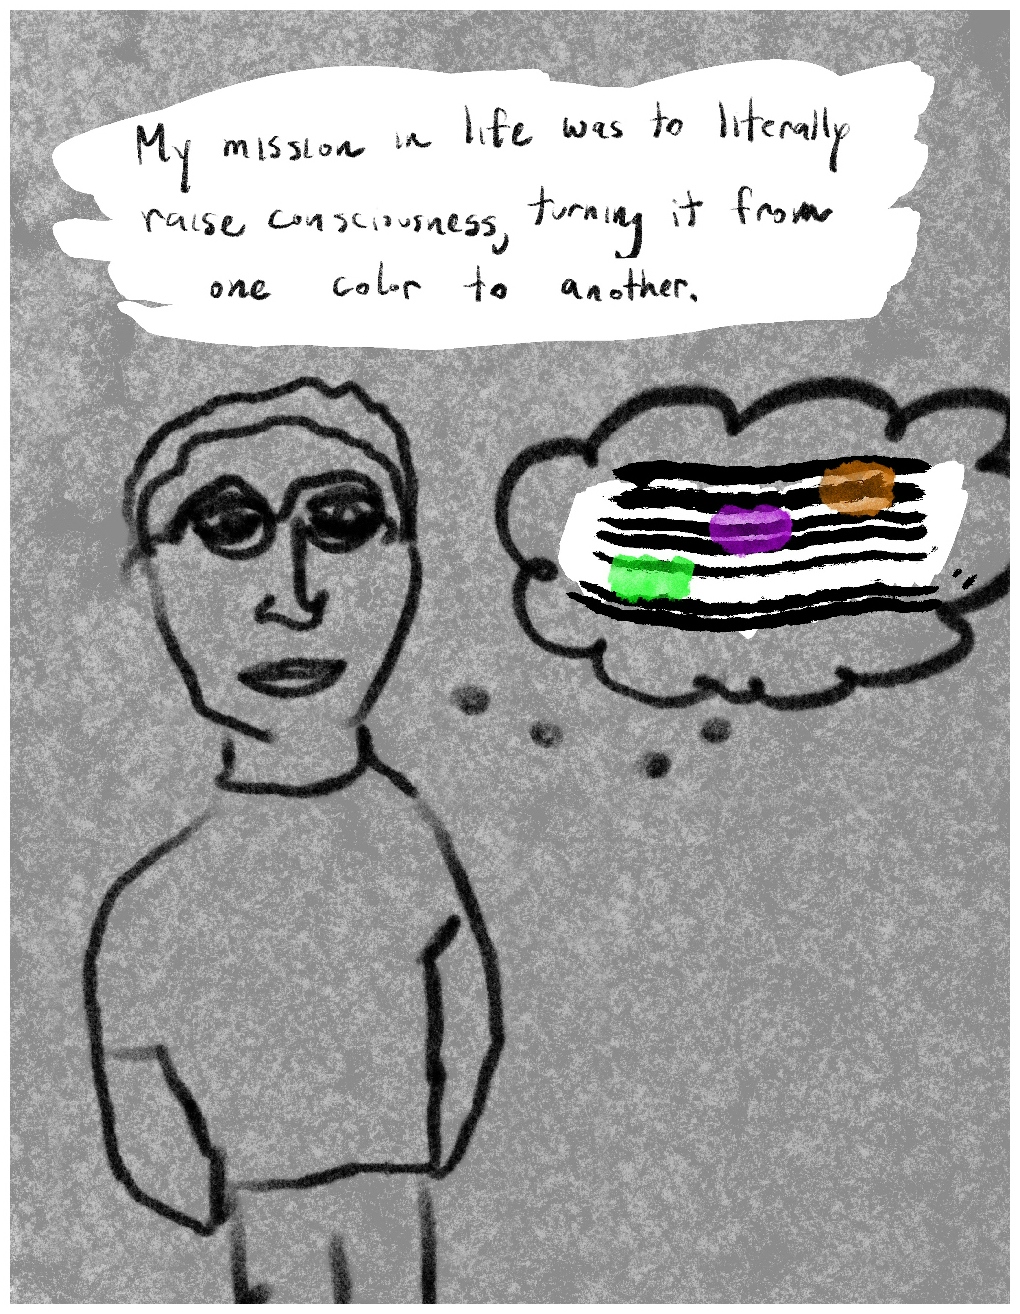 Panel 5 of a six-panel comic called 'Walled in by psychosis', consisting of thick black line drawing on a mottled grey background. A crudely drawn make figure with short hair and glasses stands looking out at the viewer. A thought bubble coming from his contains a seven narrow parallel lines, reminiscent of a musical stave. Across the lines are three 'musical notes' in the form of daubs of colour, arranged in ascending order: green, purple, orange. A block of text at the top of the panel says "My mission in life was to literally raise consciousness, turning it from one color to another."